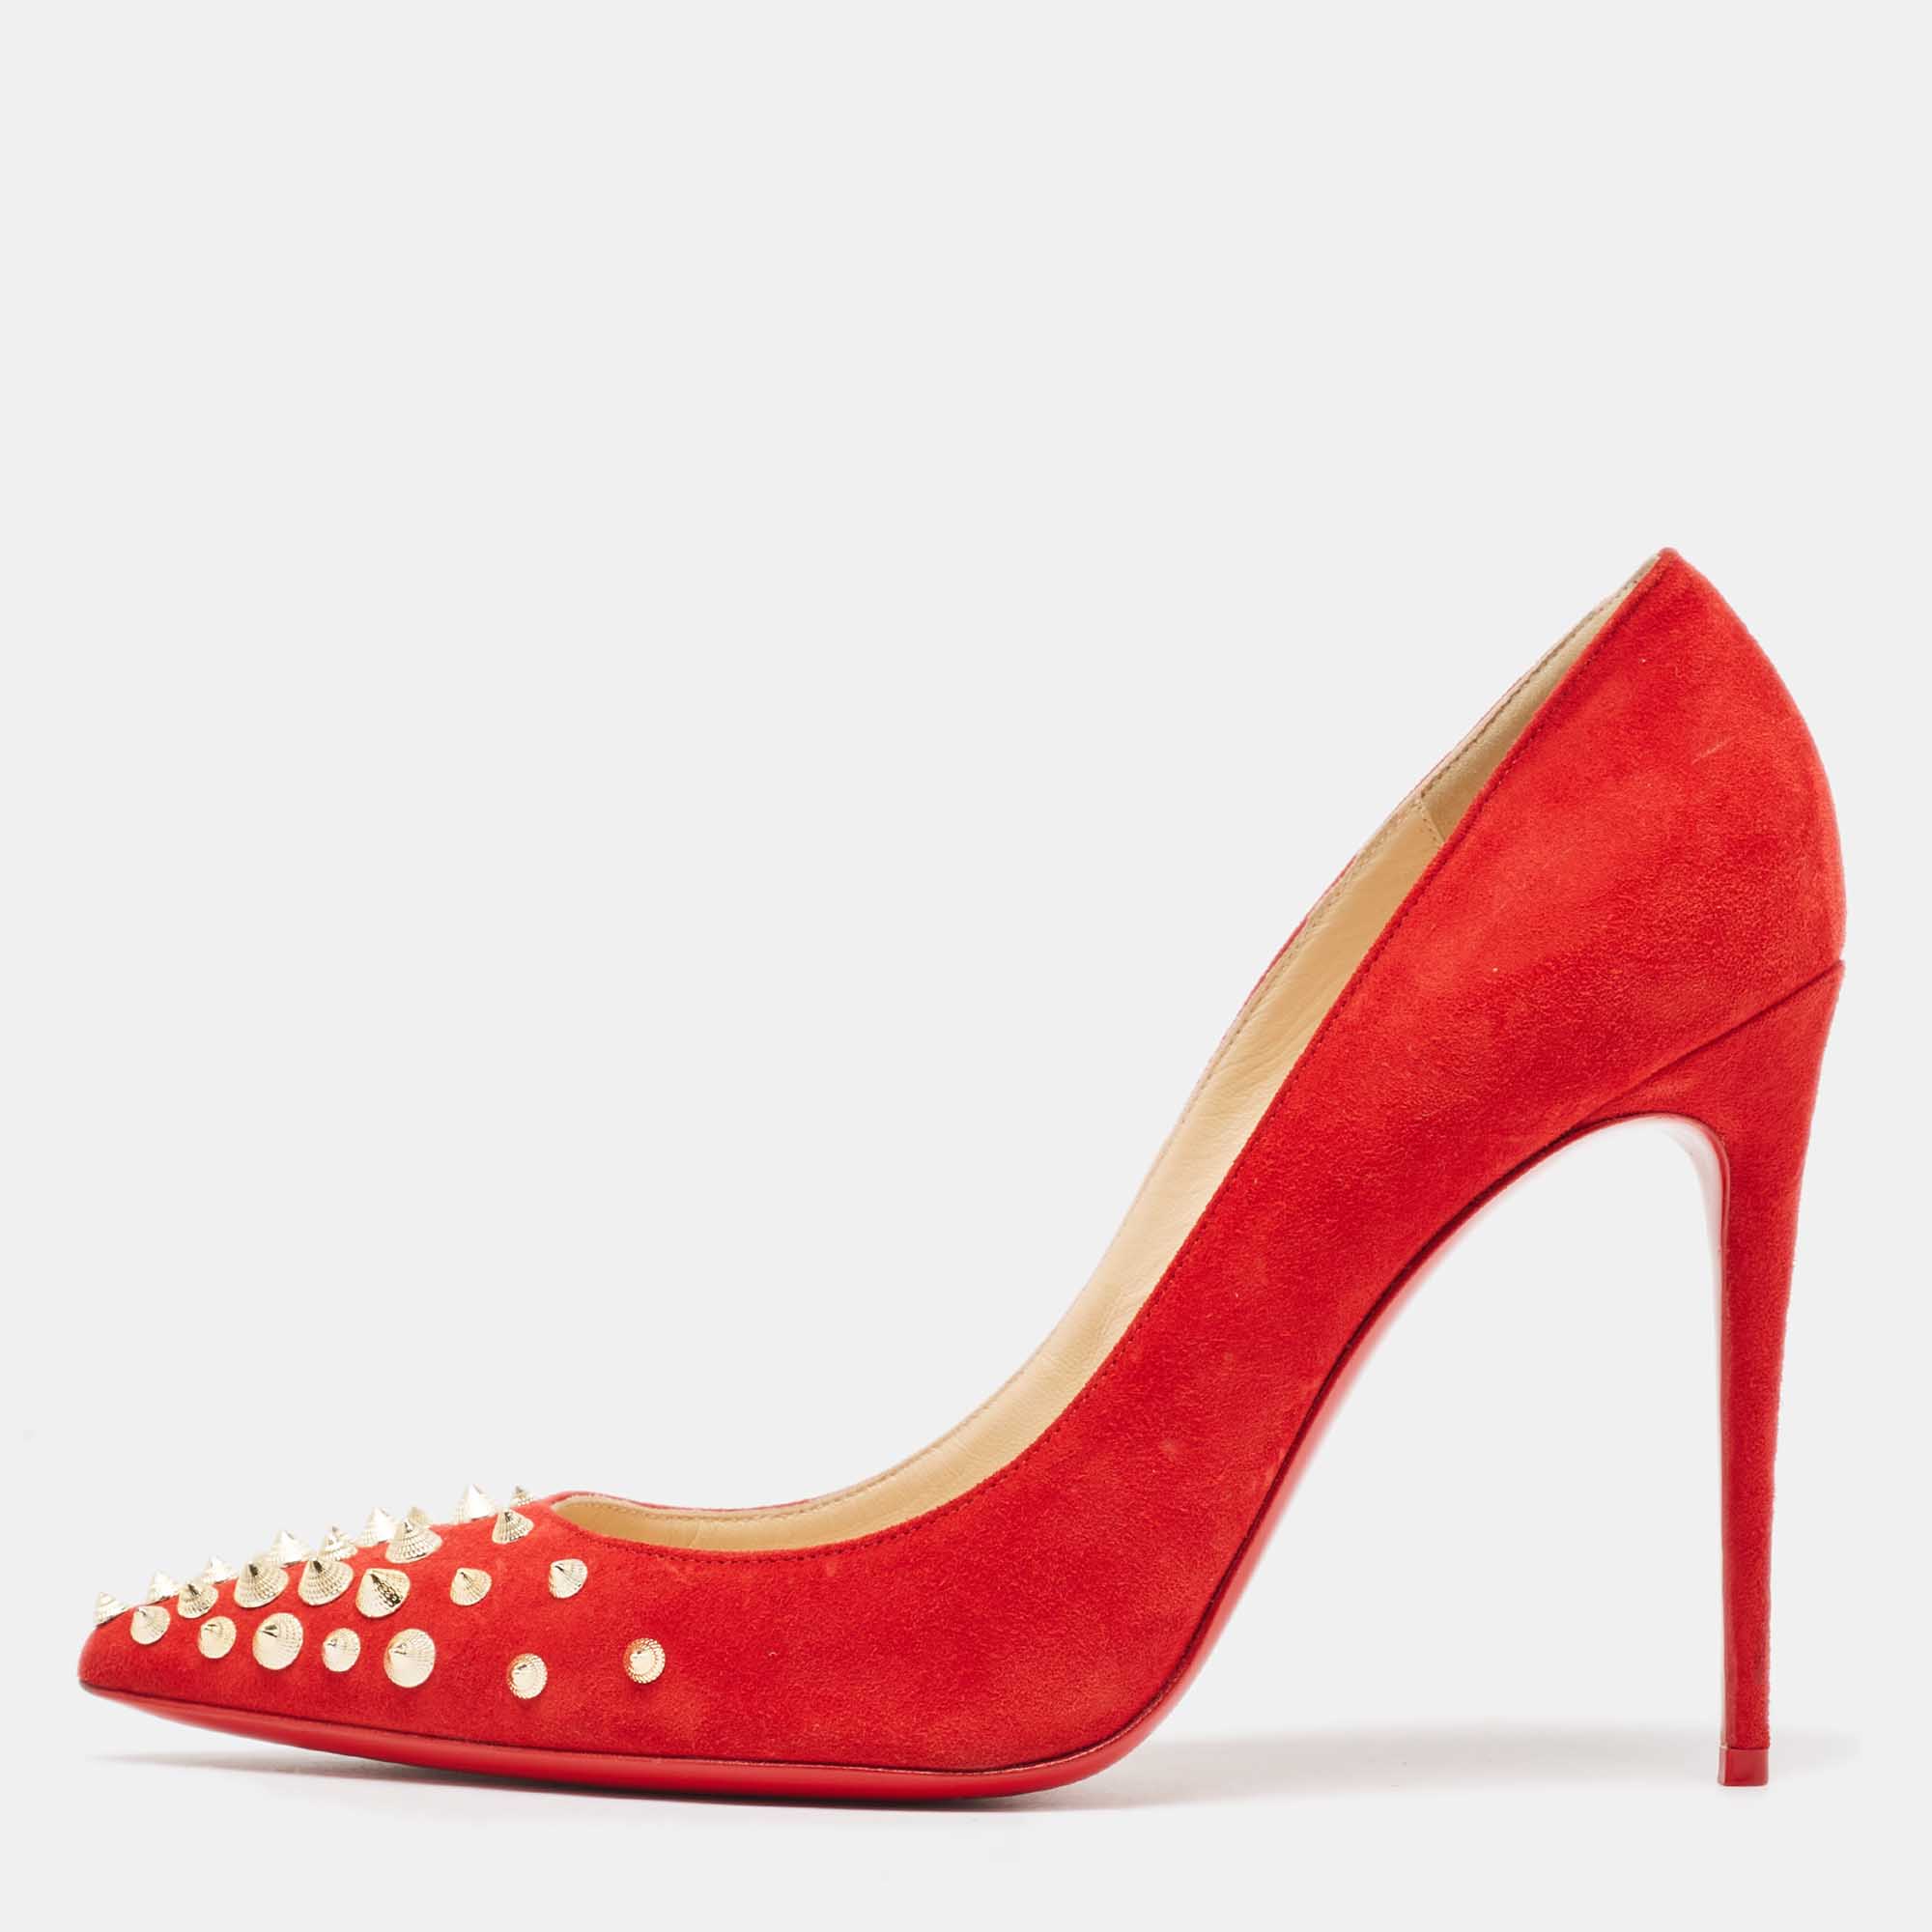 Christian louboutin red suede spikyshell pumps size 40